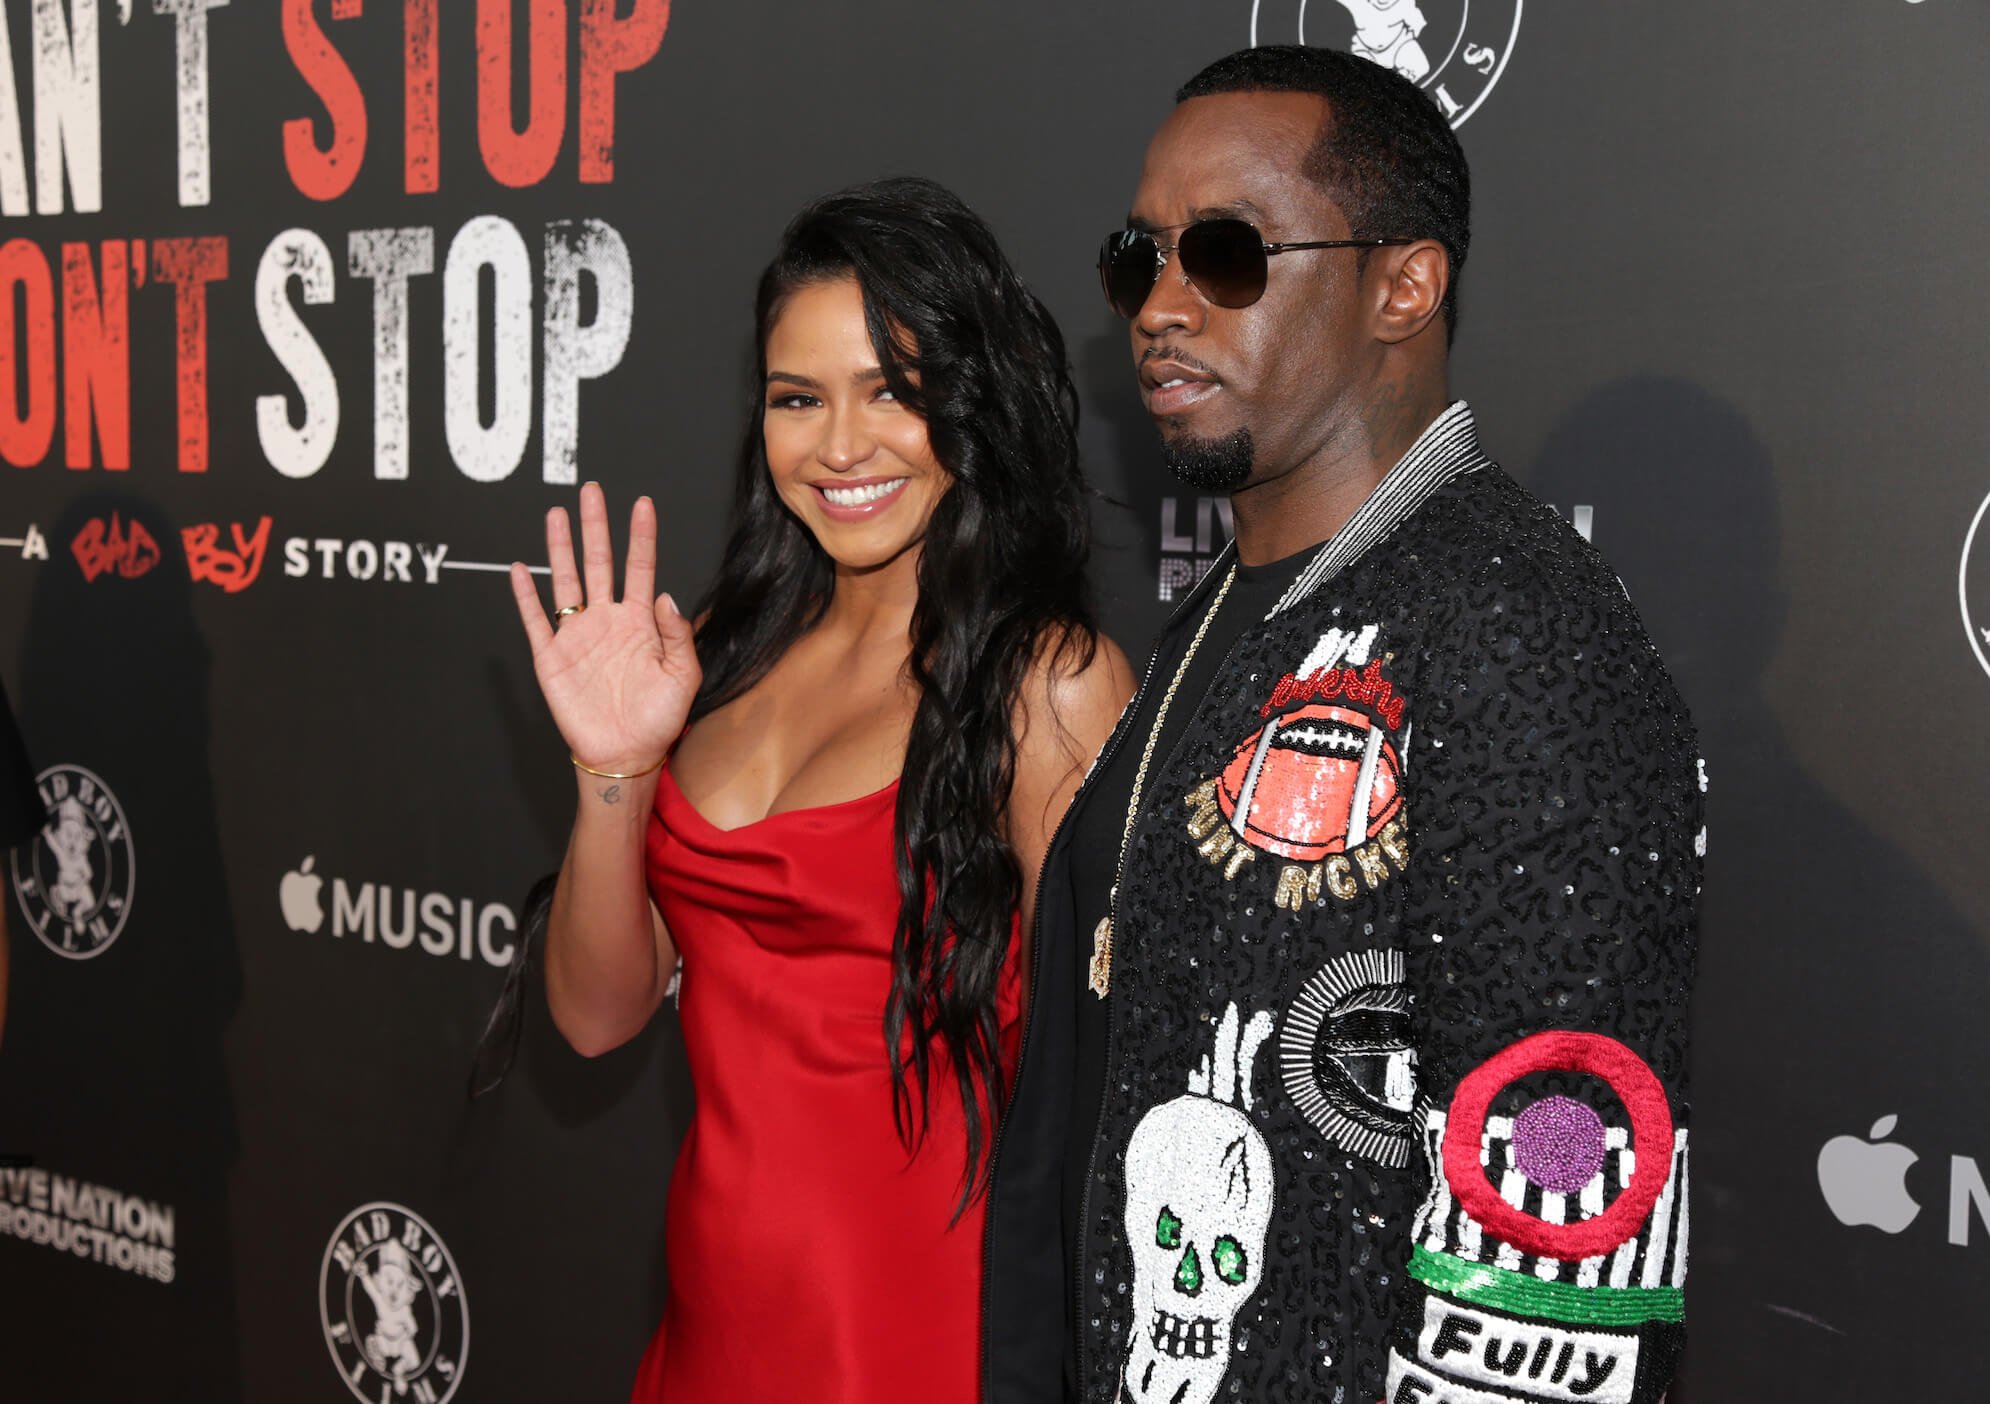 Cassie Ventura waving to cameras and smiling while she holds Sean 'P. Diddy' Combs' hand at an event